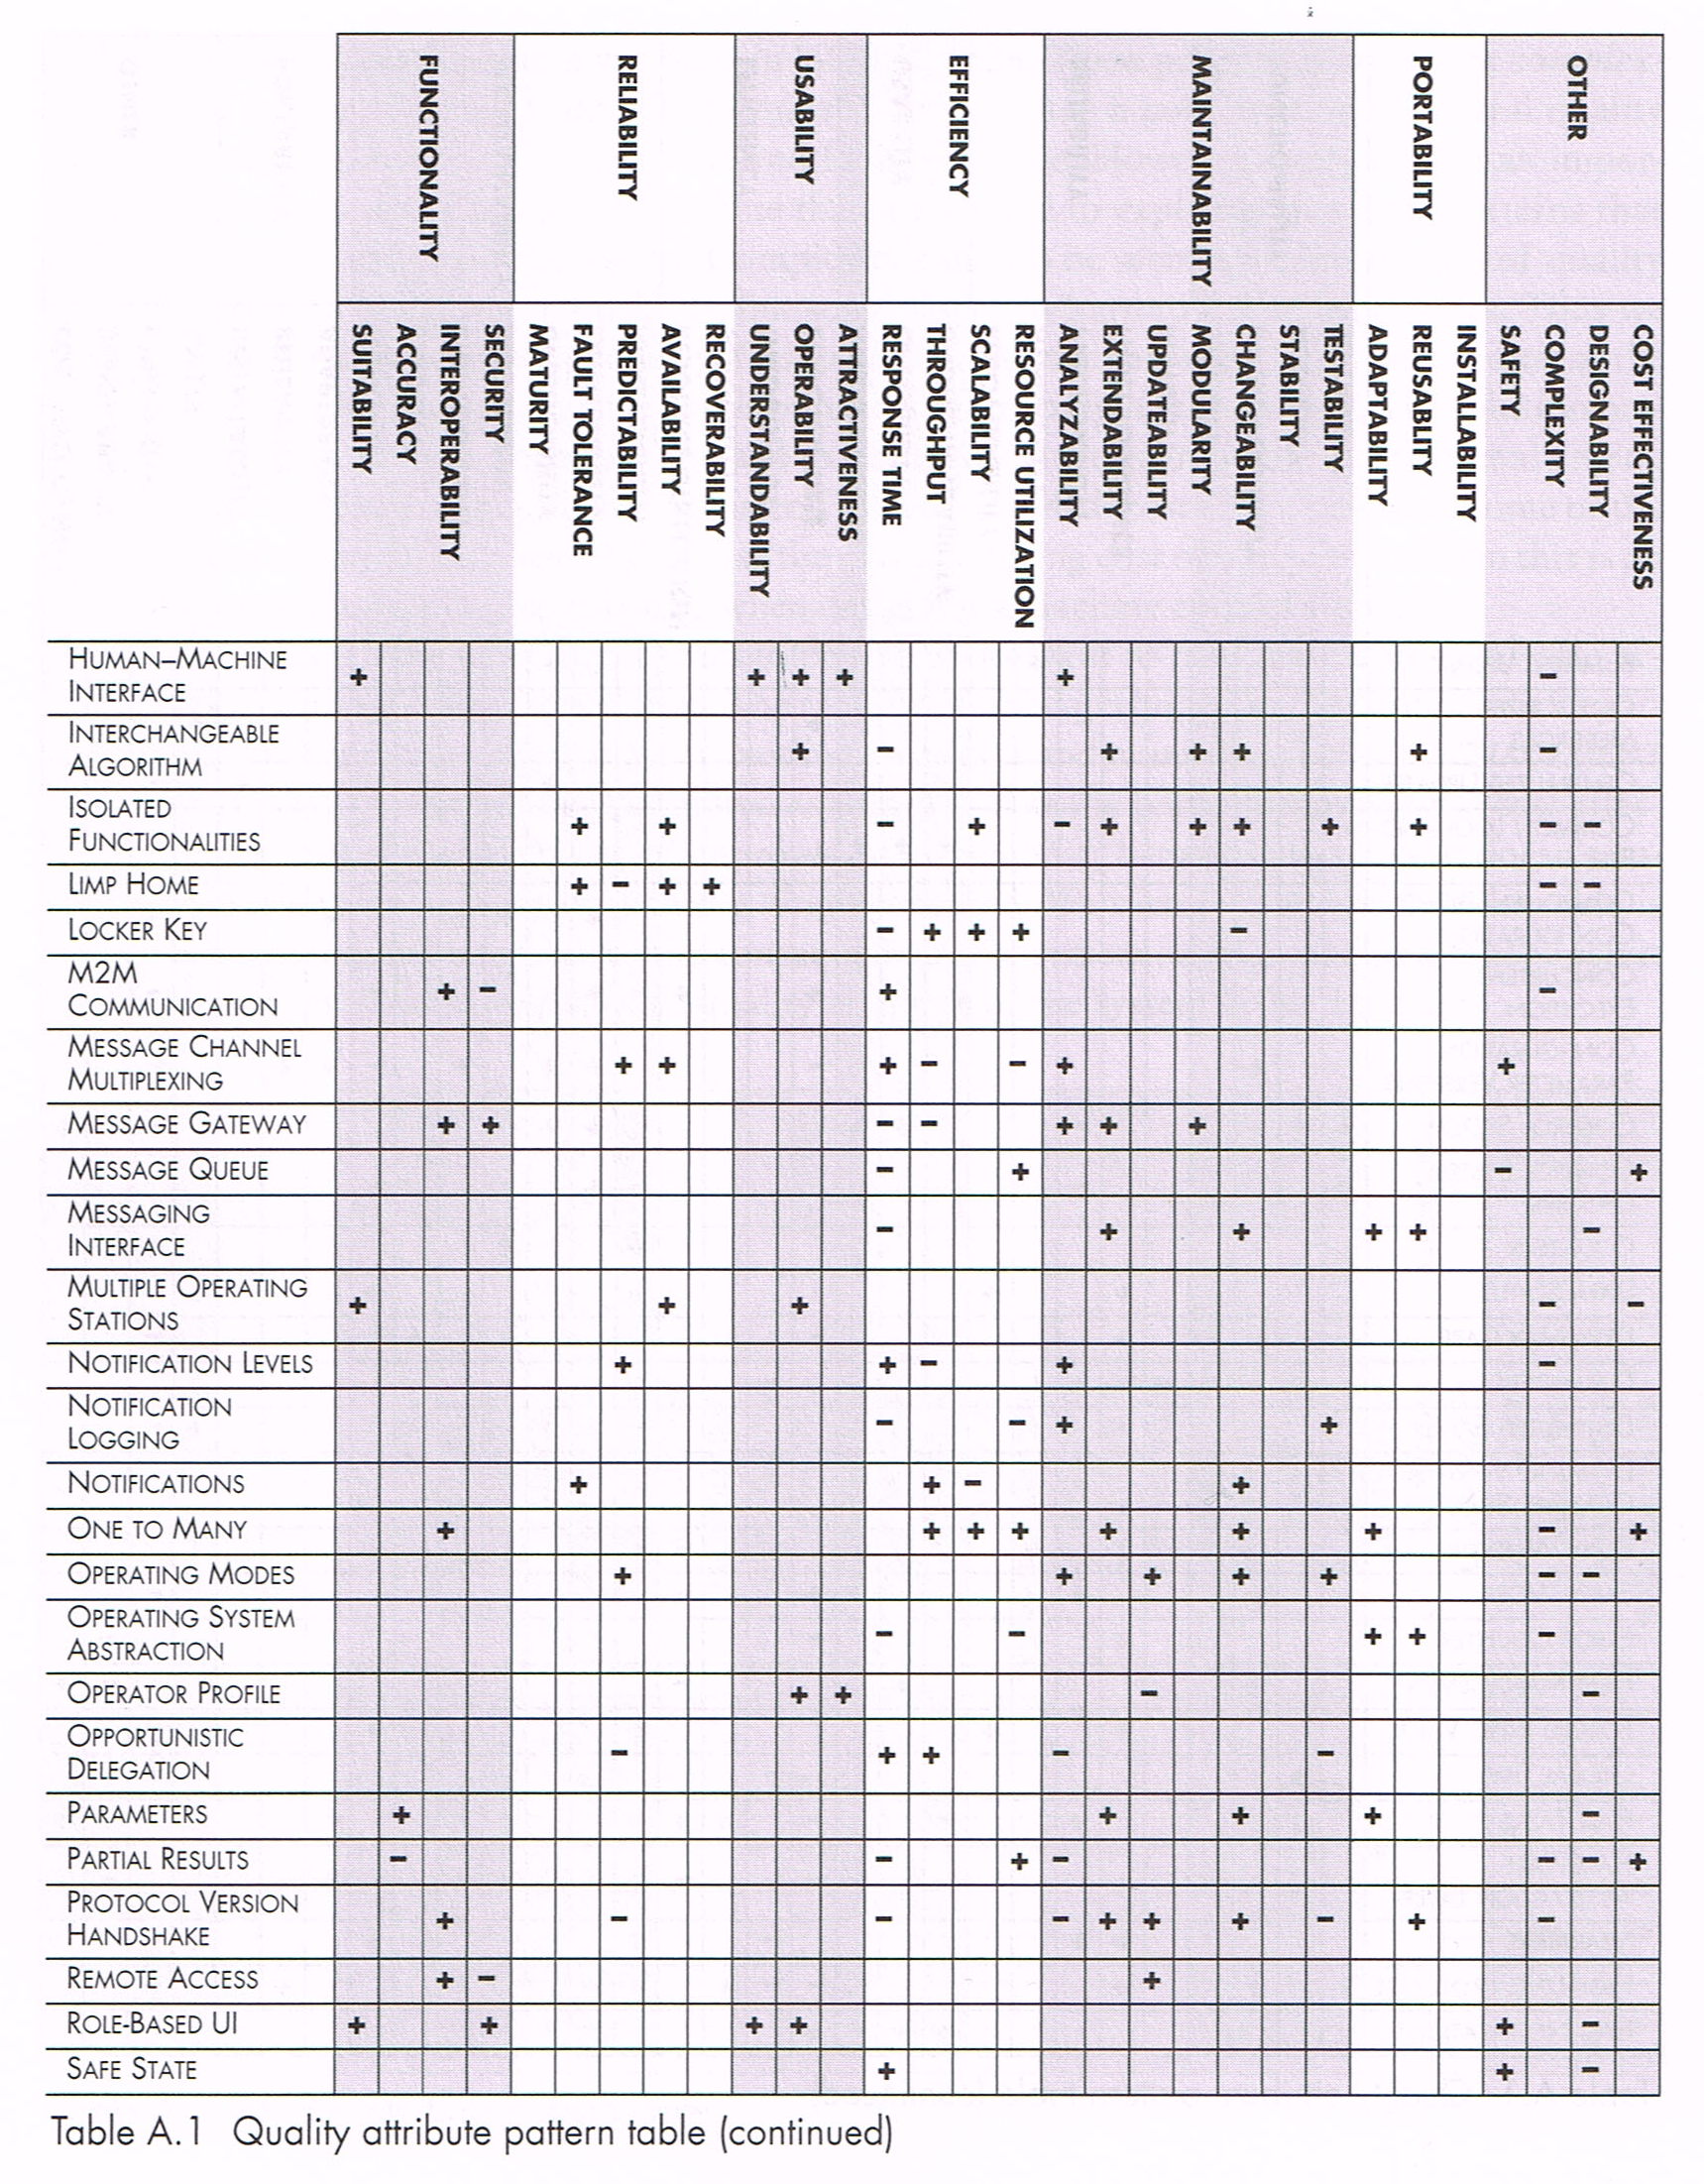 Appendix A, Table A.1. Quality attribute pattern table (extract)